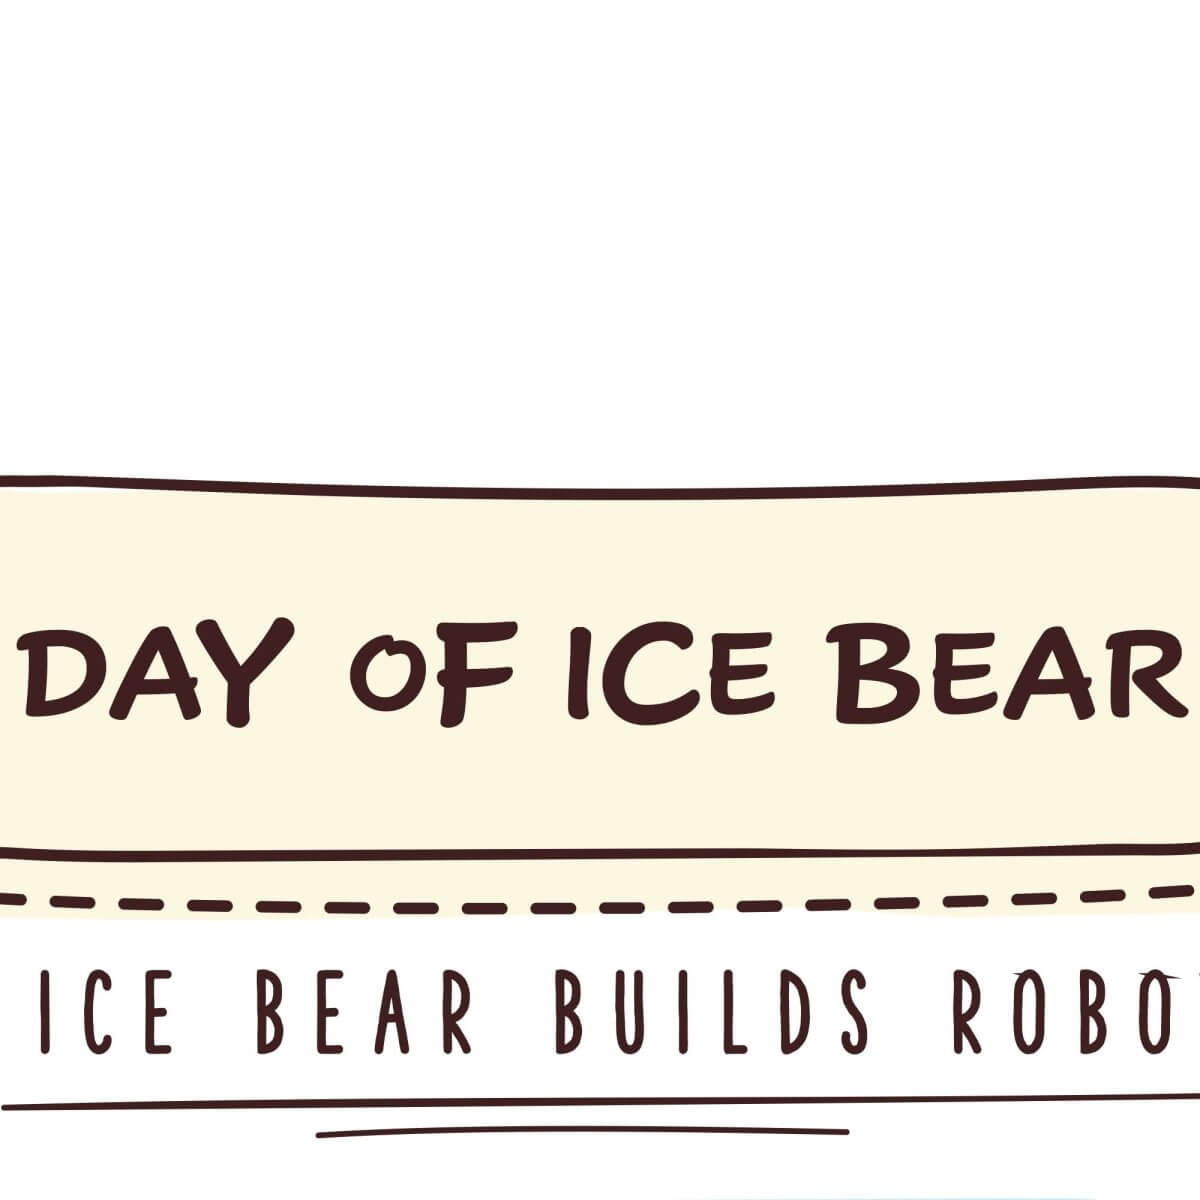 Kismet Decals Home & Room Decor We Bare Bears Ice Bear's Day Wall decal sticker - officially licensed - latex printed with no solvent odor - Kismet Decals